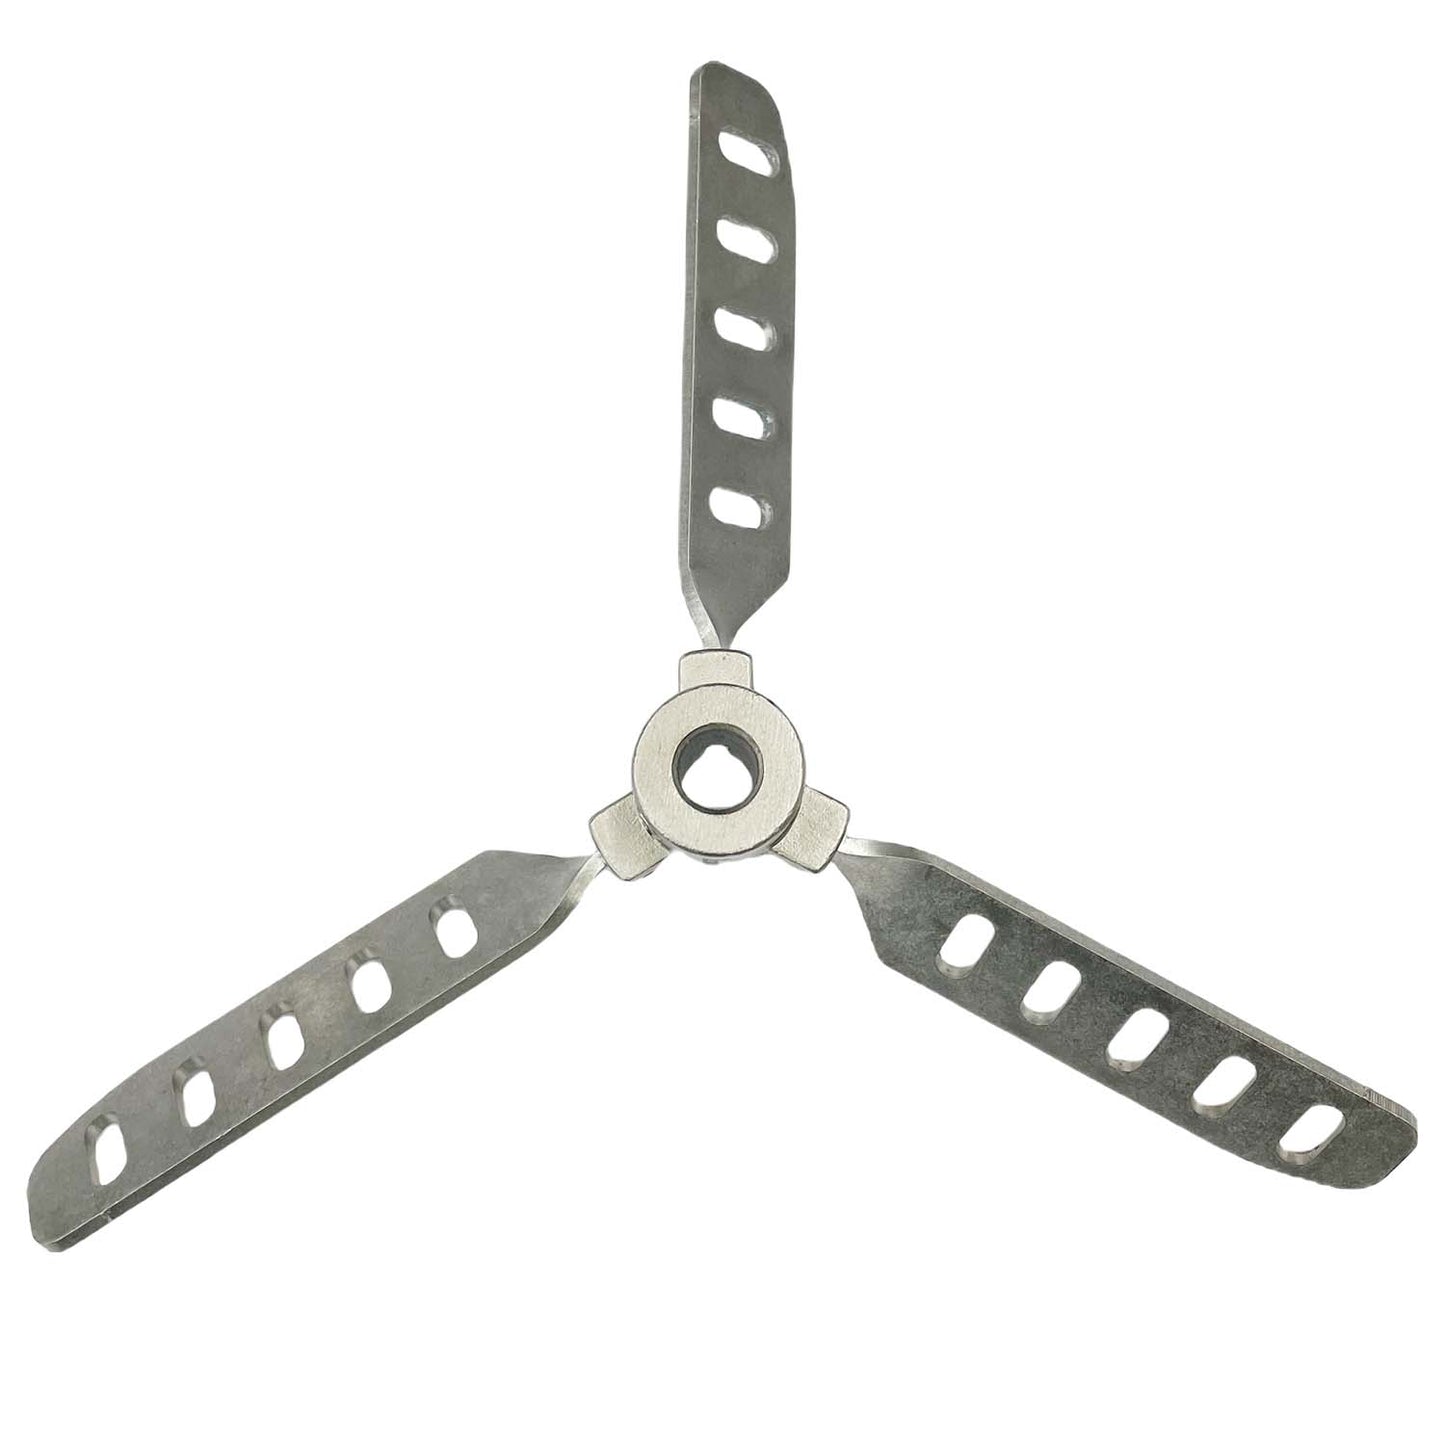 Cosmostar EX10S12 10 inches Expandable Stainless Steel Agitator Mixing Blade Compatible with 0.47” /12mm Shaft